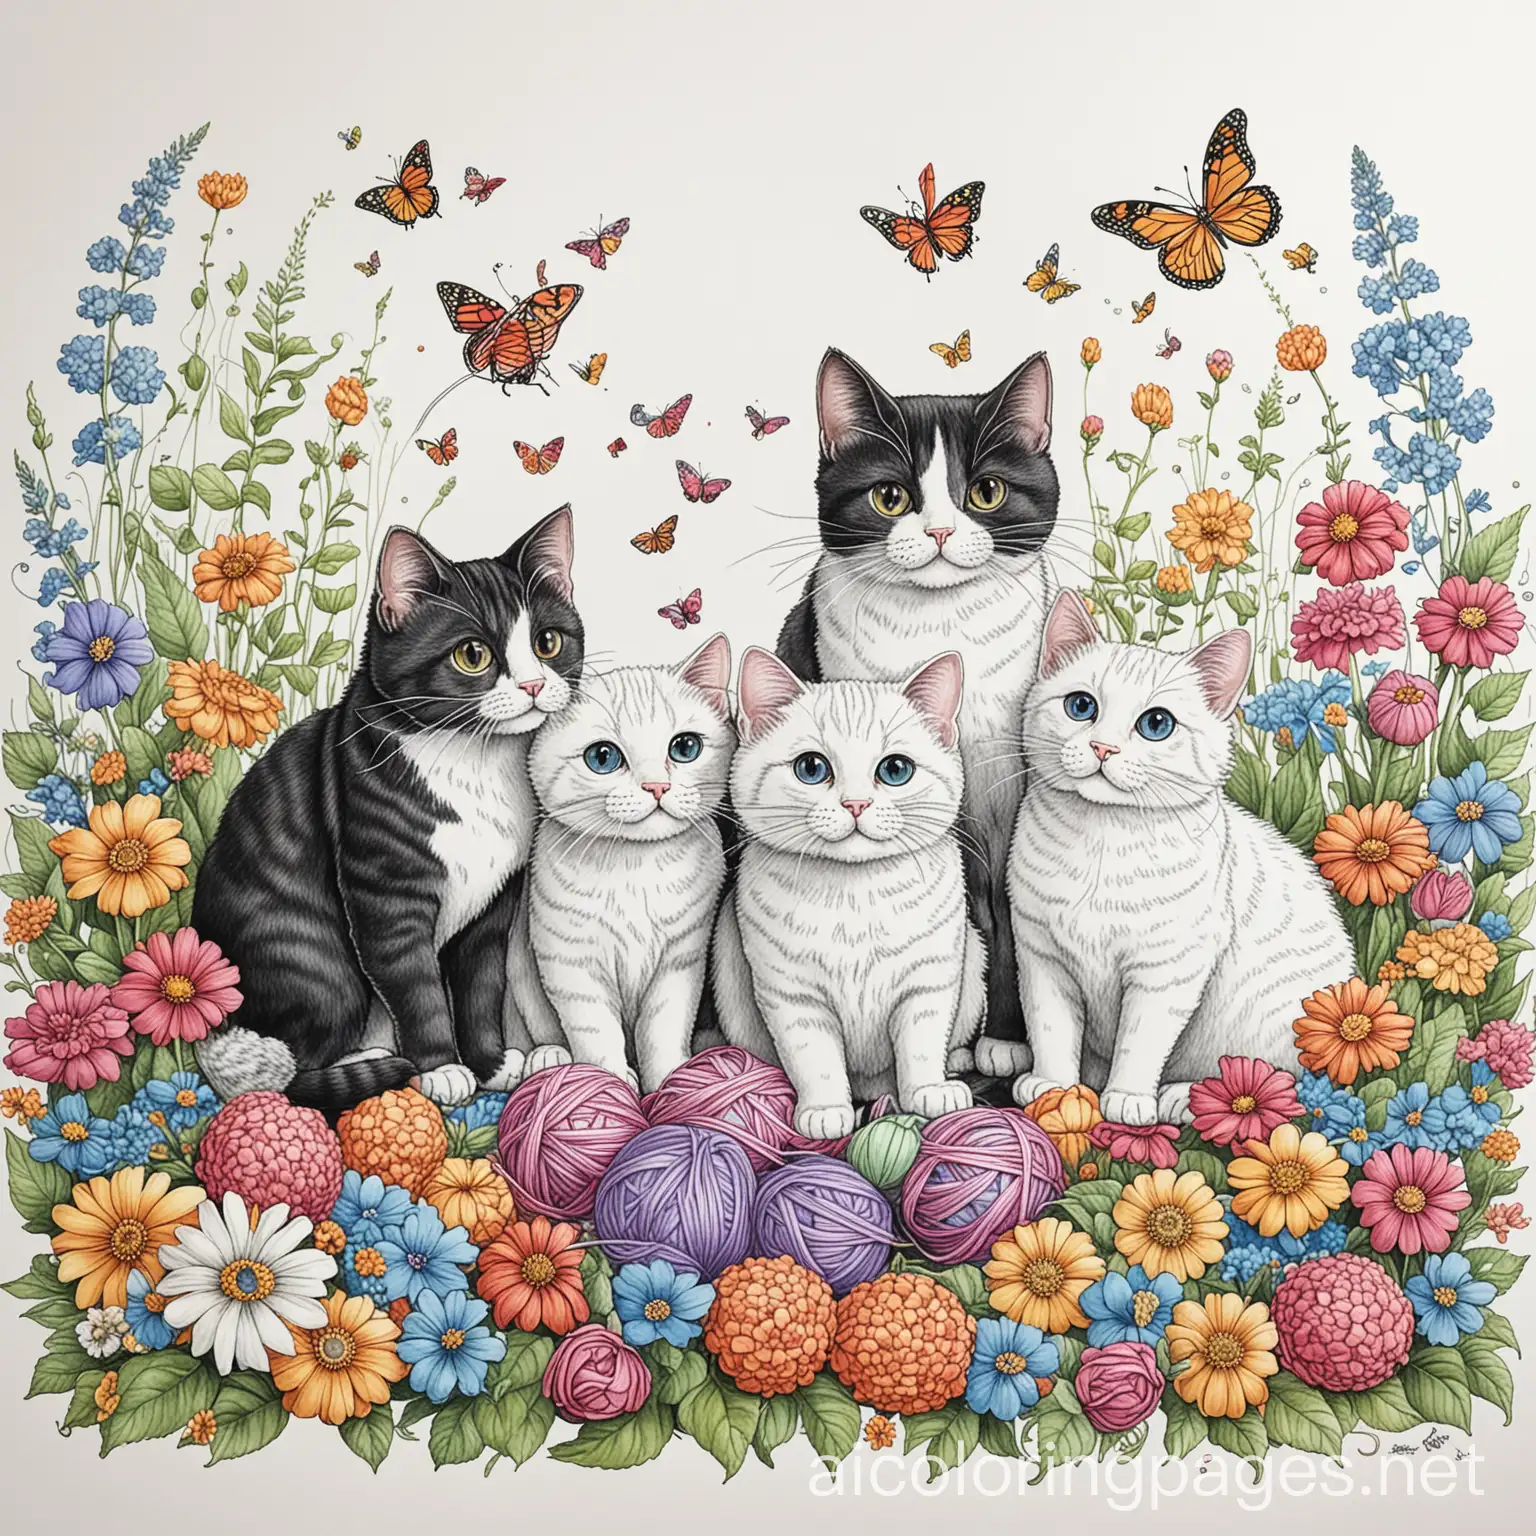 A whimsical scene of cats playing with balls of yarn, surrounded by colorful flowers and butterflies., Coloring Page, black and white, line art, white background, Simplicity, Ample White Space. The background of the coloring page is plain white to make it easy for young children to color within the lines. The outlines of all the subjects are easy to distinguish, making it simple for kids to color without too much difficulty